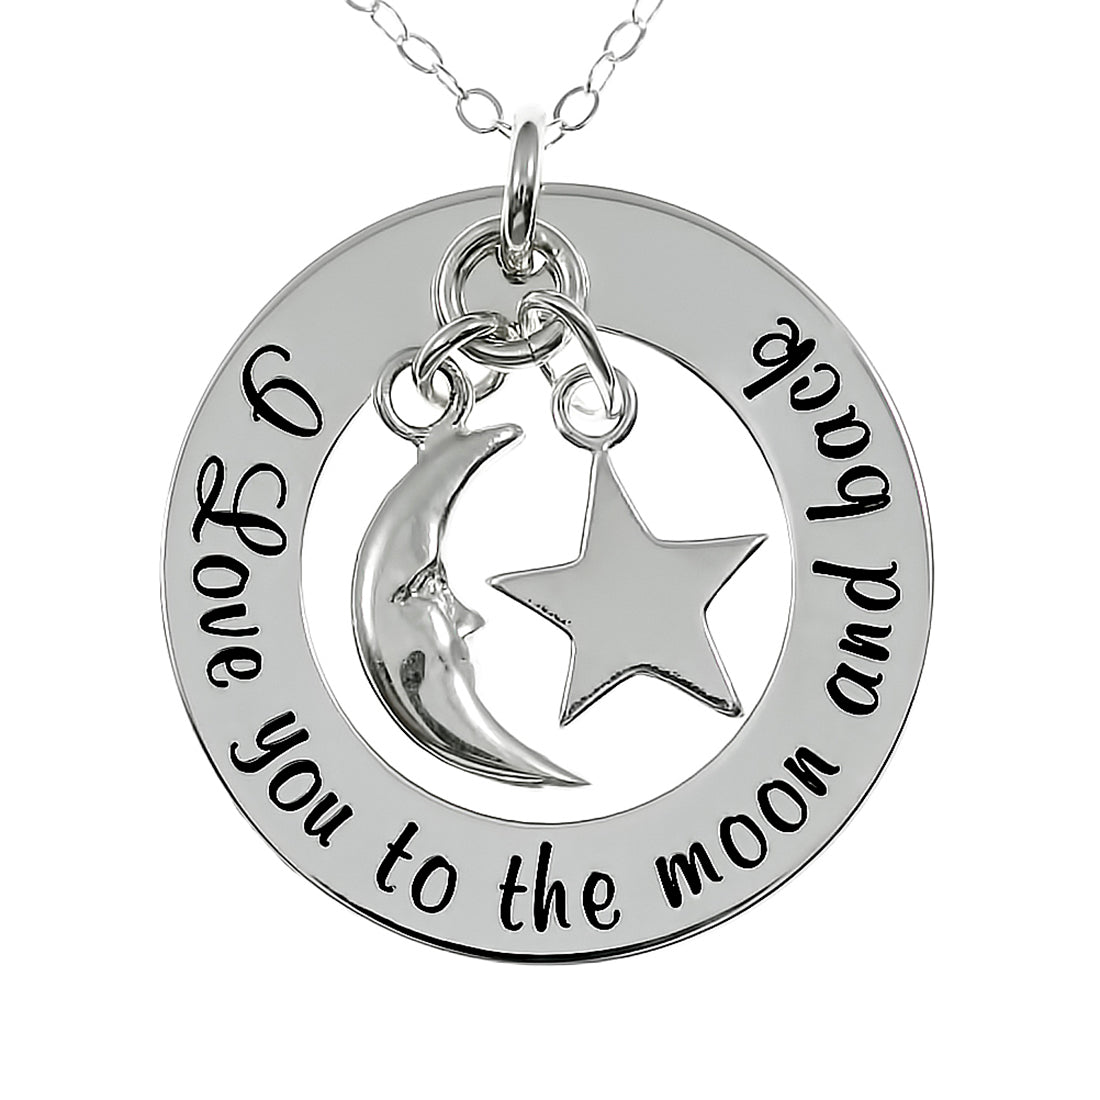 Guess How Much I Love You Sterling Silver Necklace